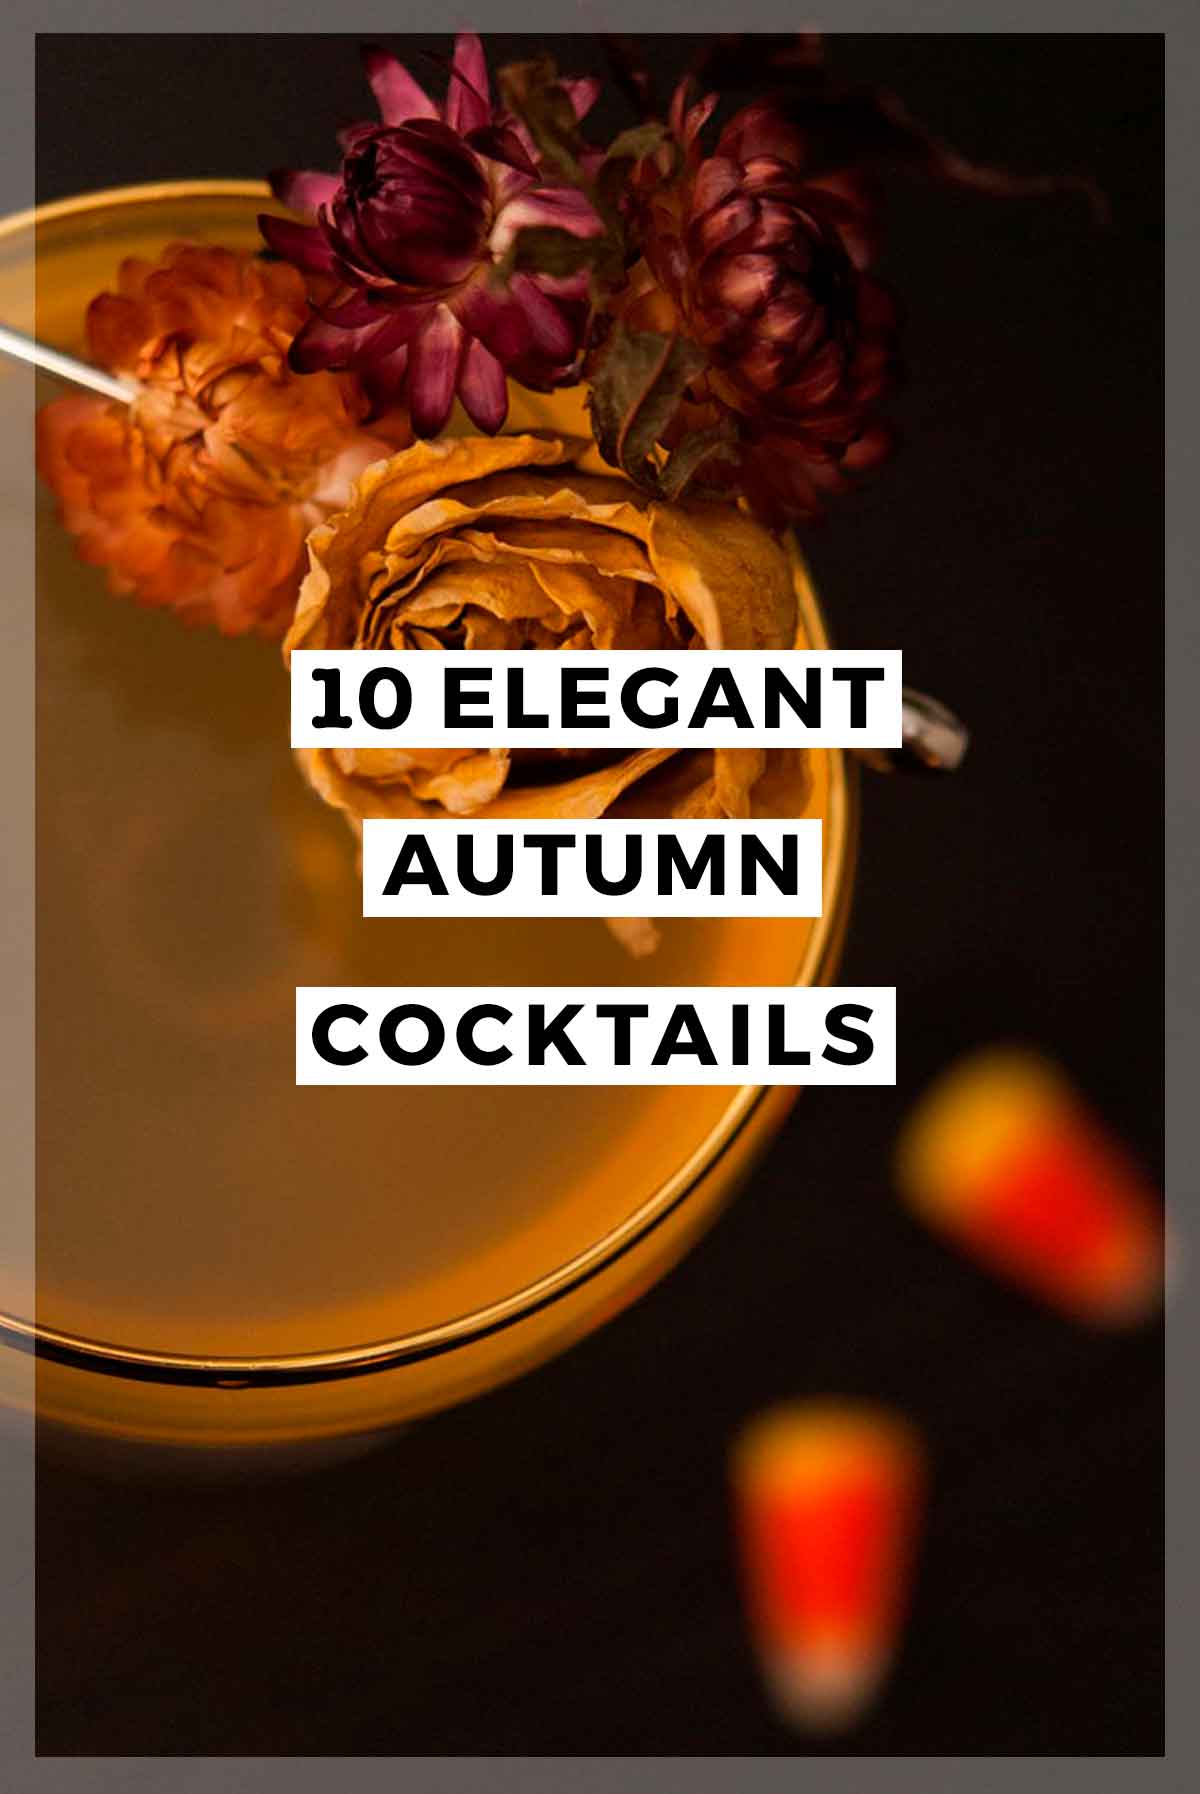 A fall cocktail with a title that says "10 Elegant Autumn Cocktails."